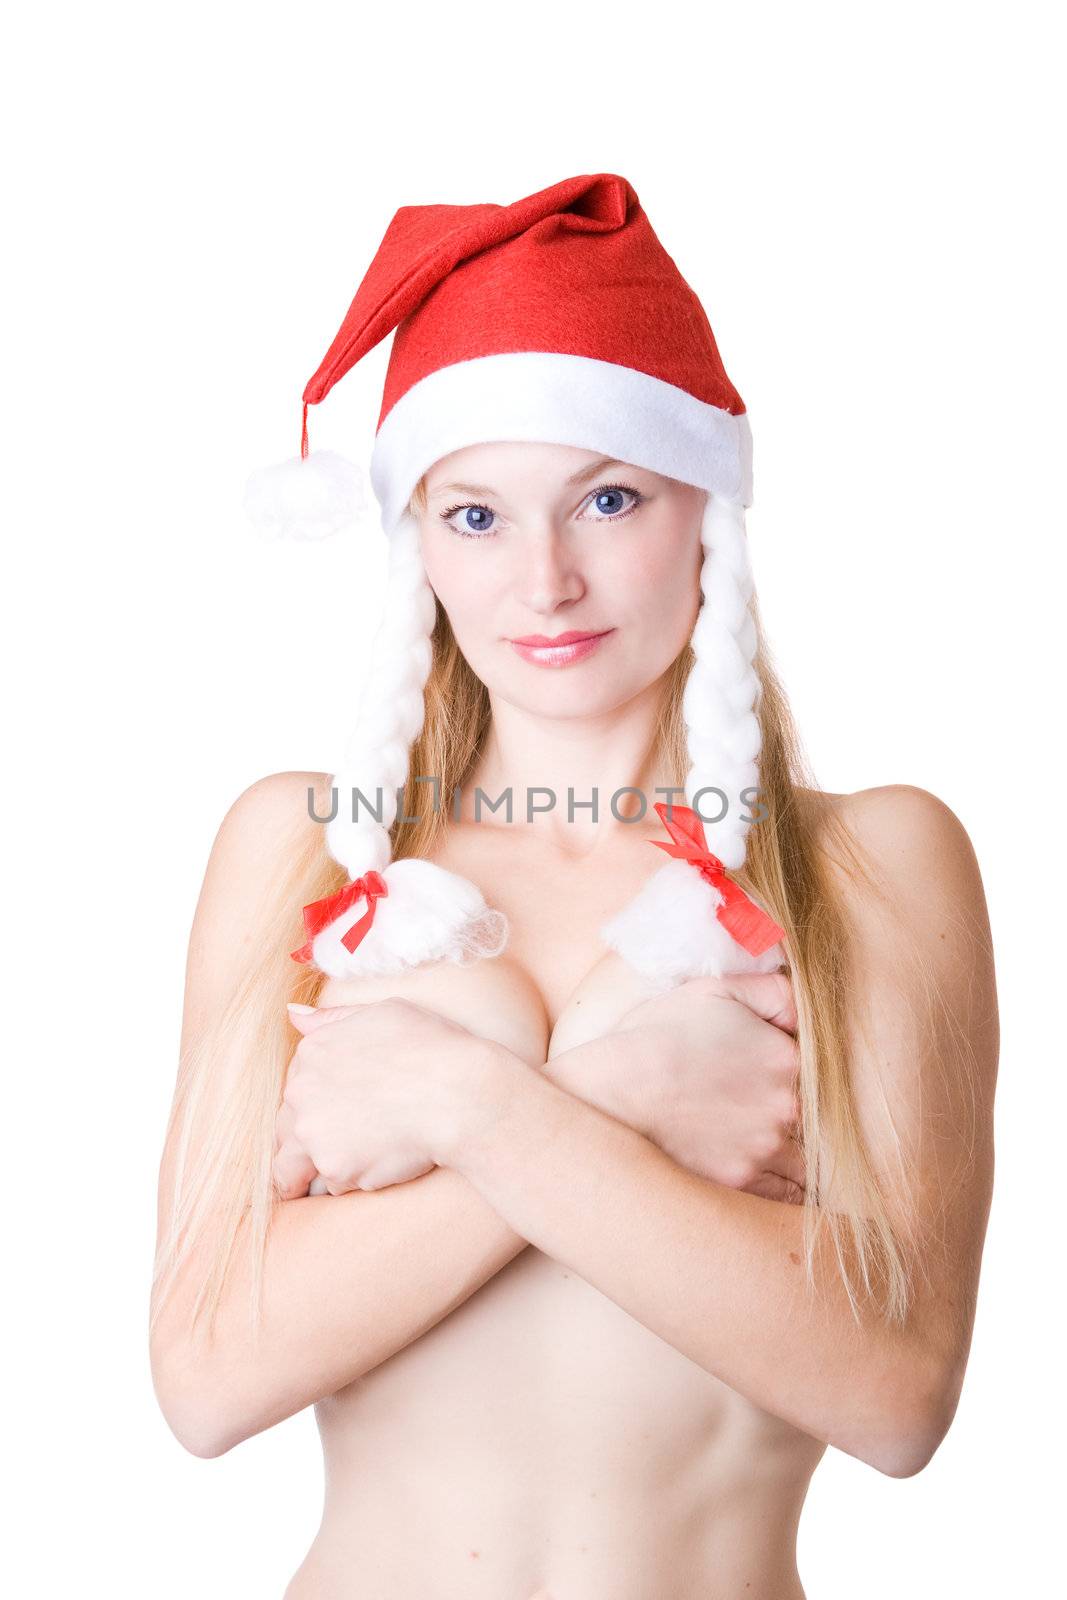 Naked woman in Christmas cap by vsurkov